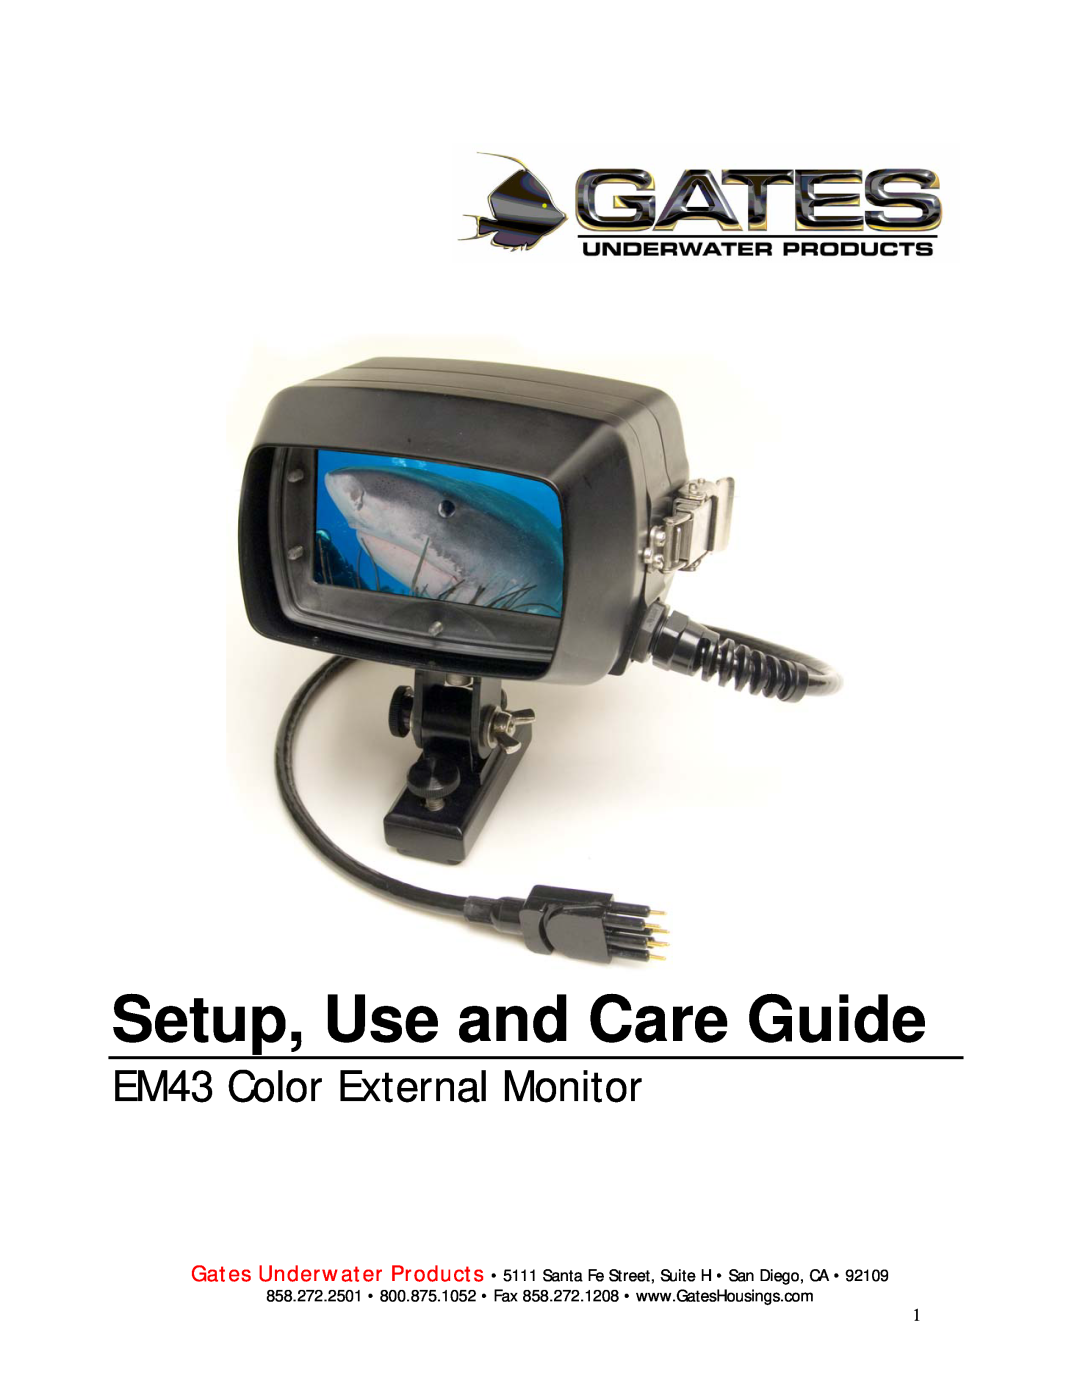 Philips manual Setup, Use and Care Guide, EM43 Color External Monitor 